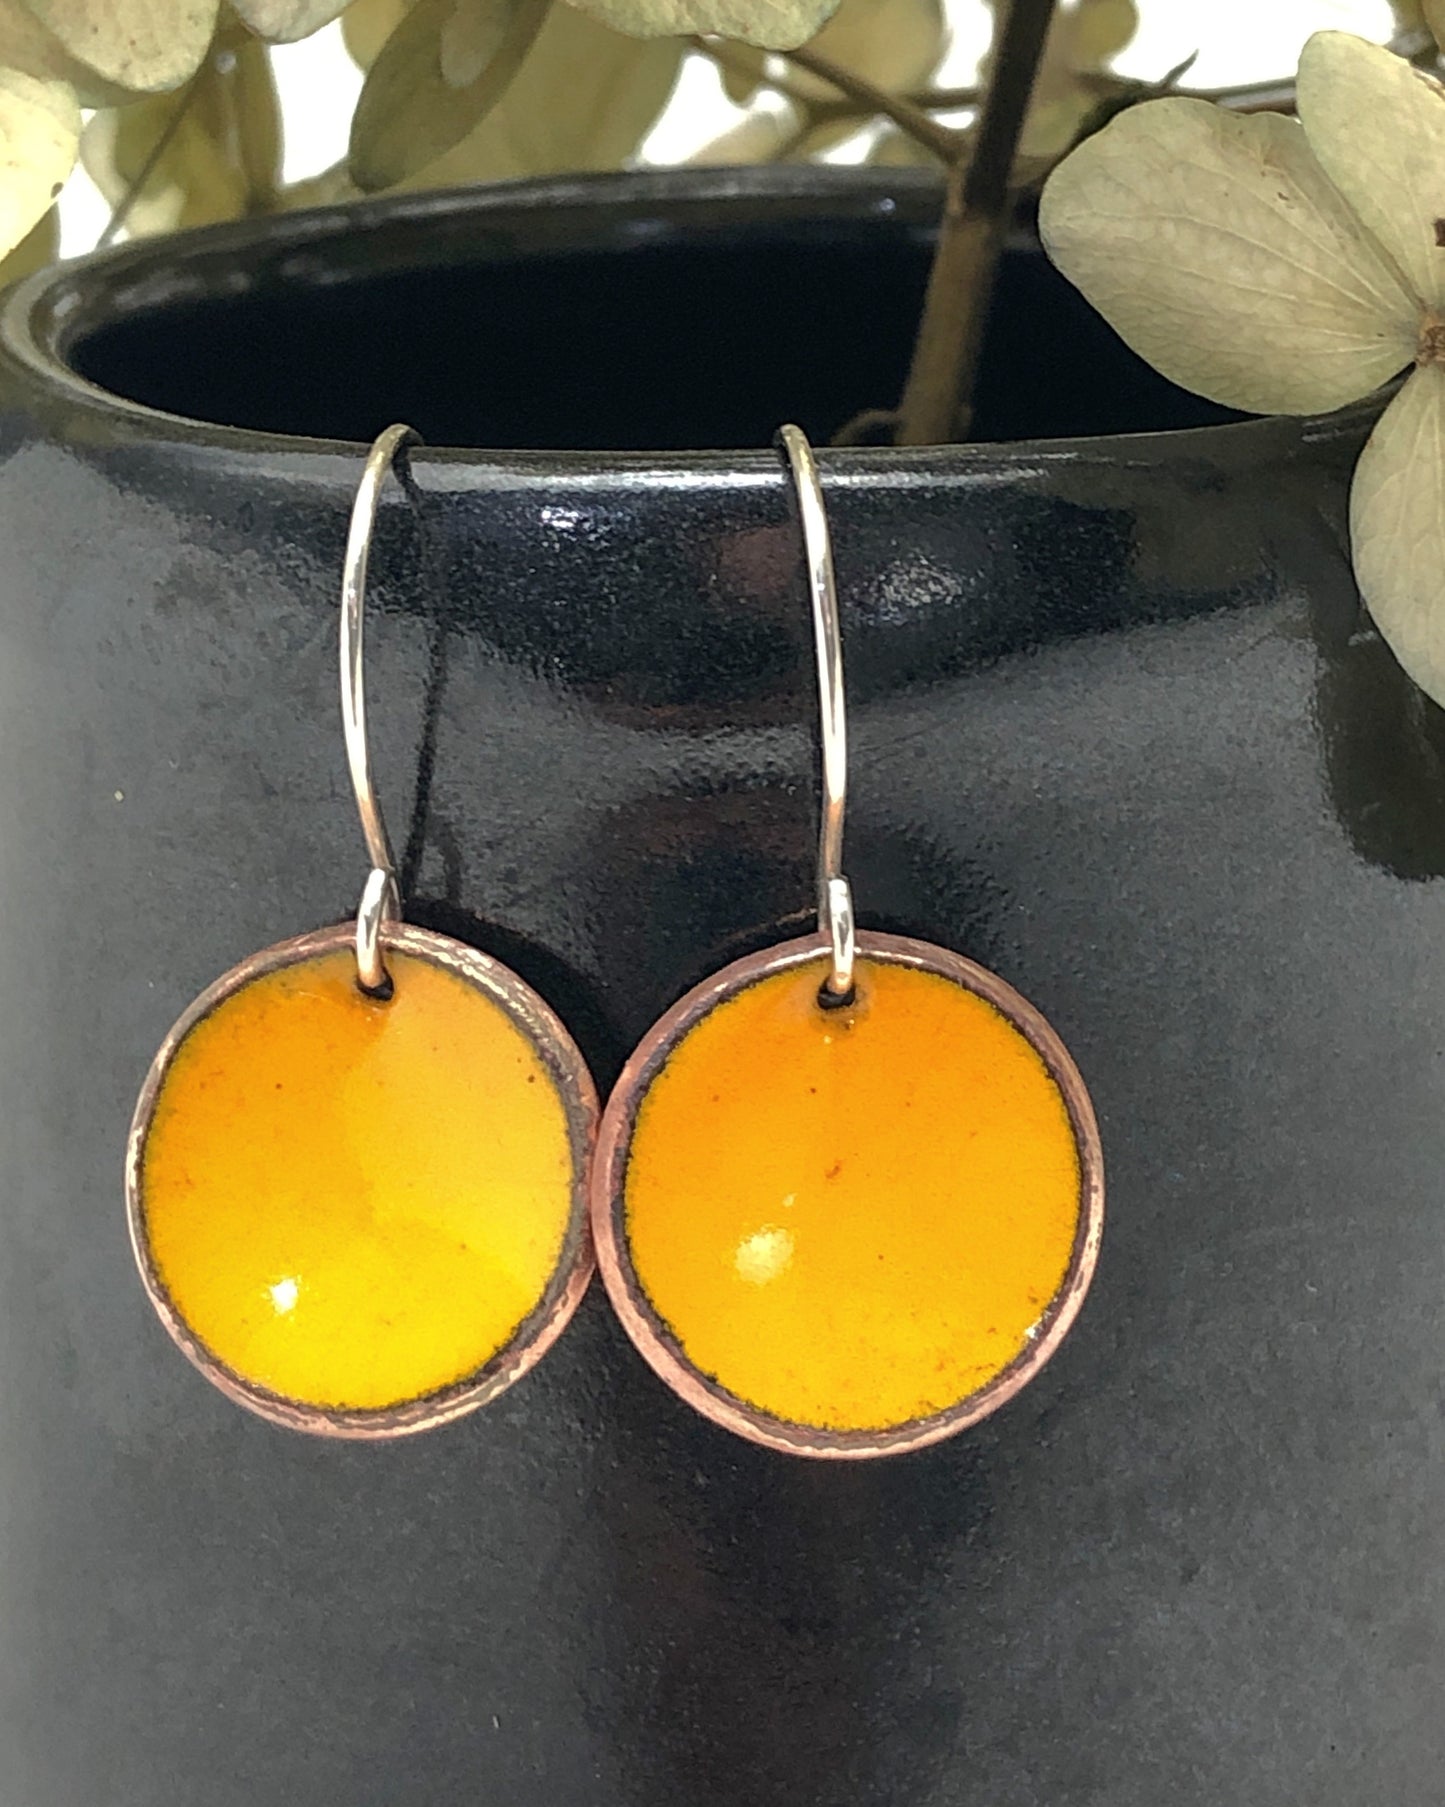 a pair of yellow earrings sitting on top of a vase